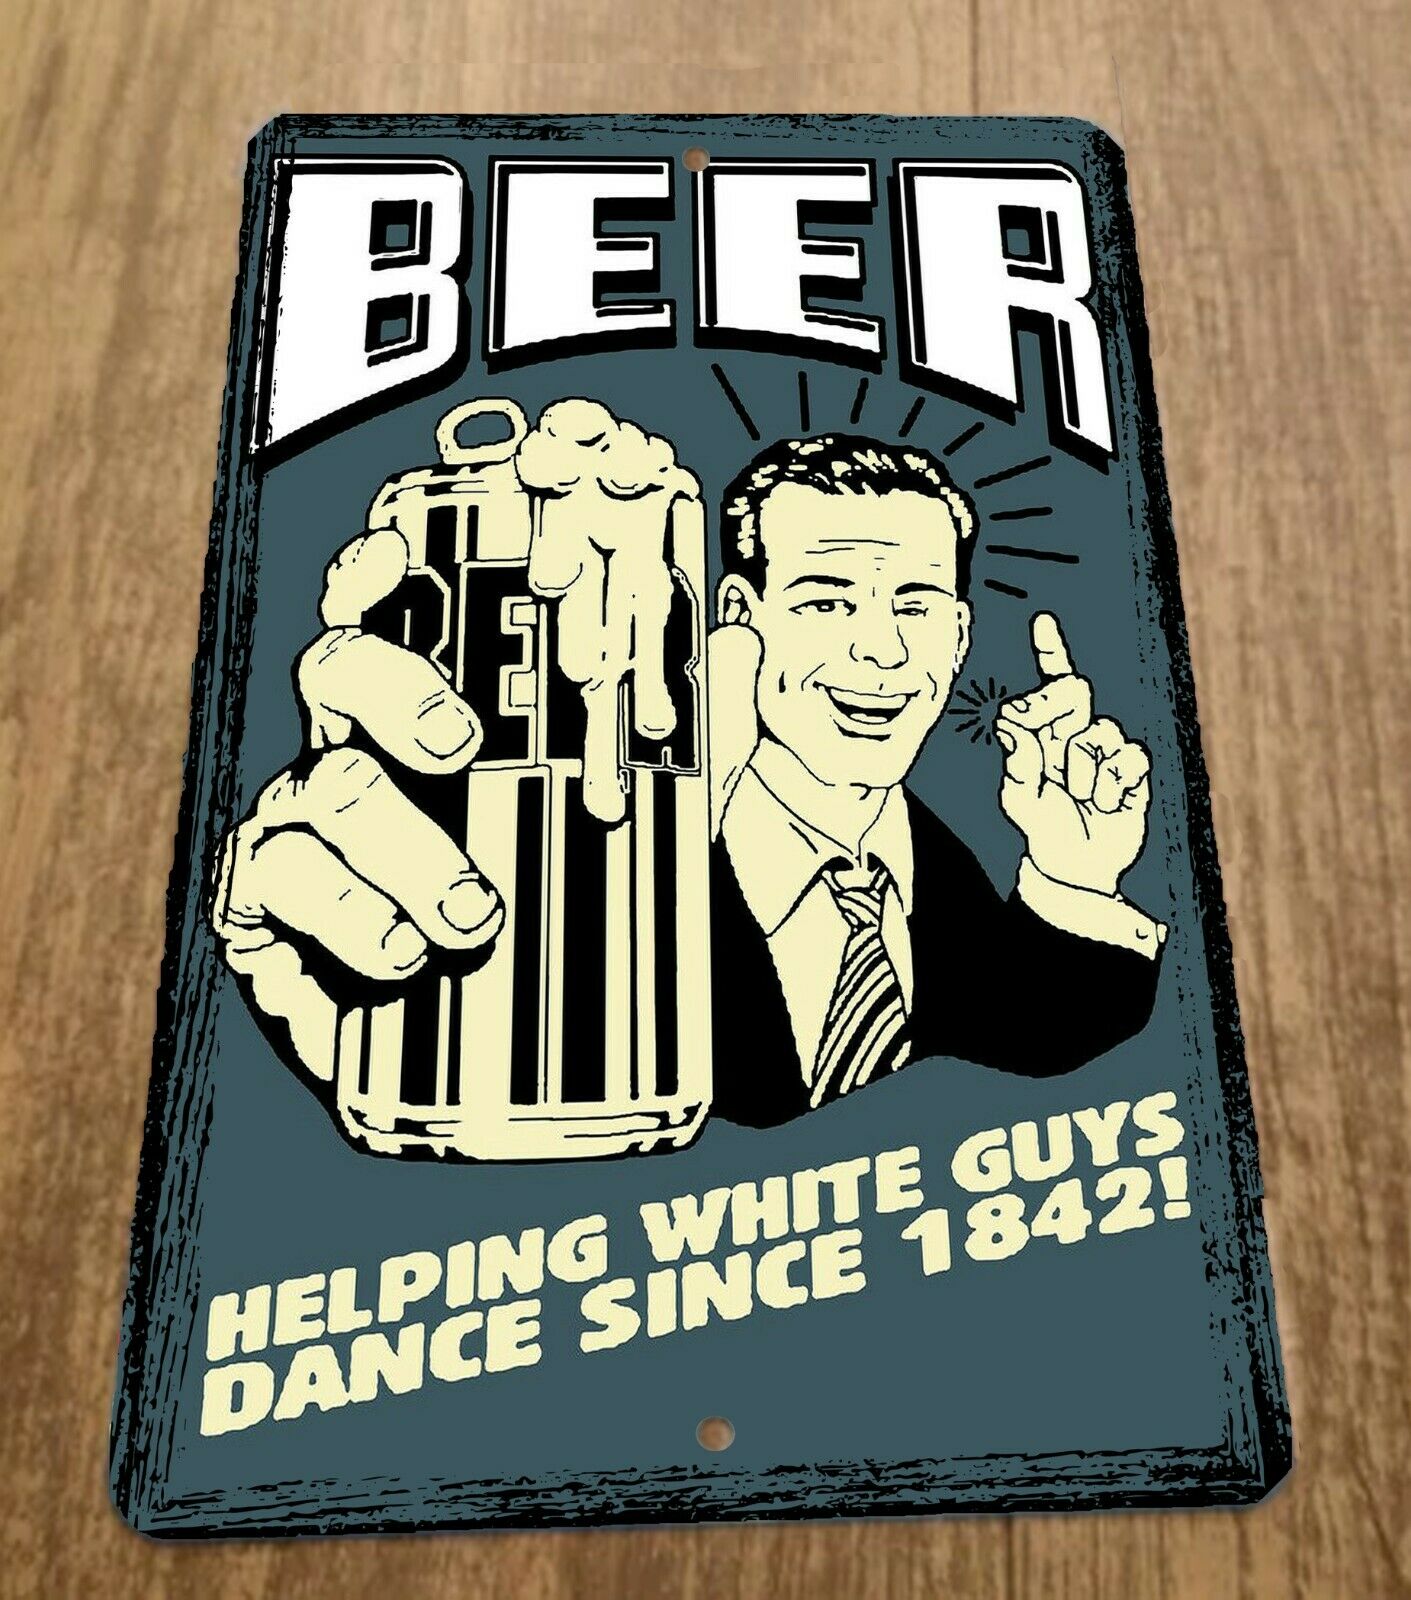 Beer Helping White Guys Dance Since 1842 Funny 8x12 Metal Wall Alcohol Bar Sign